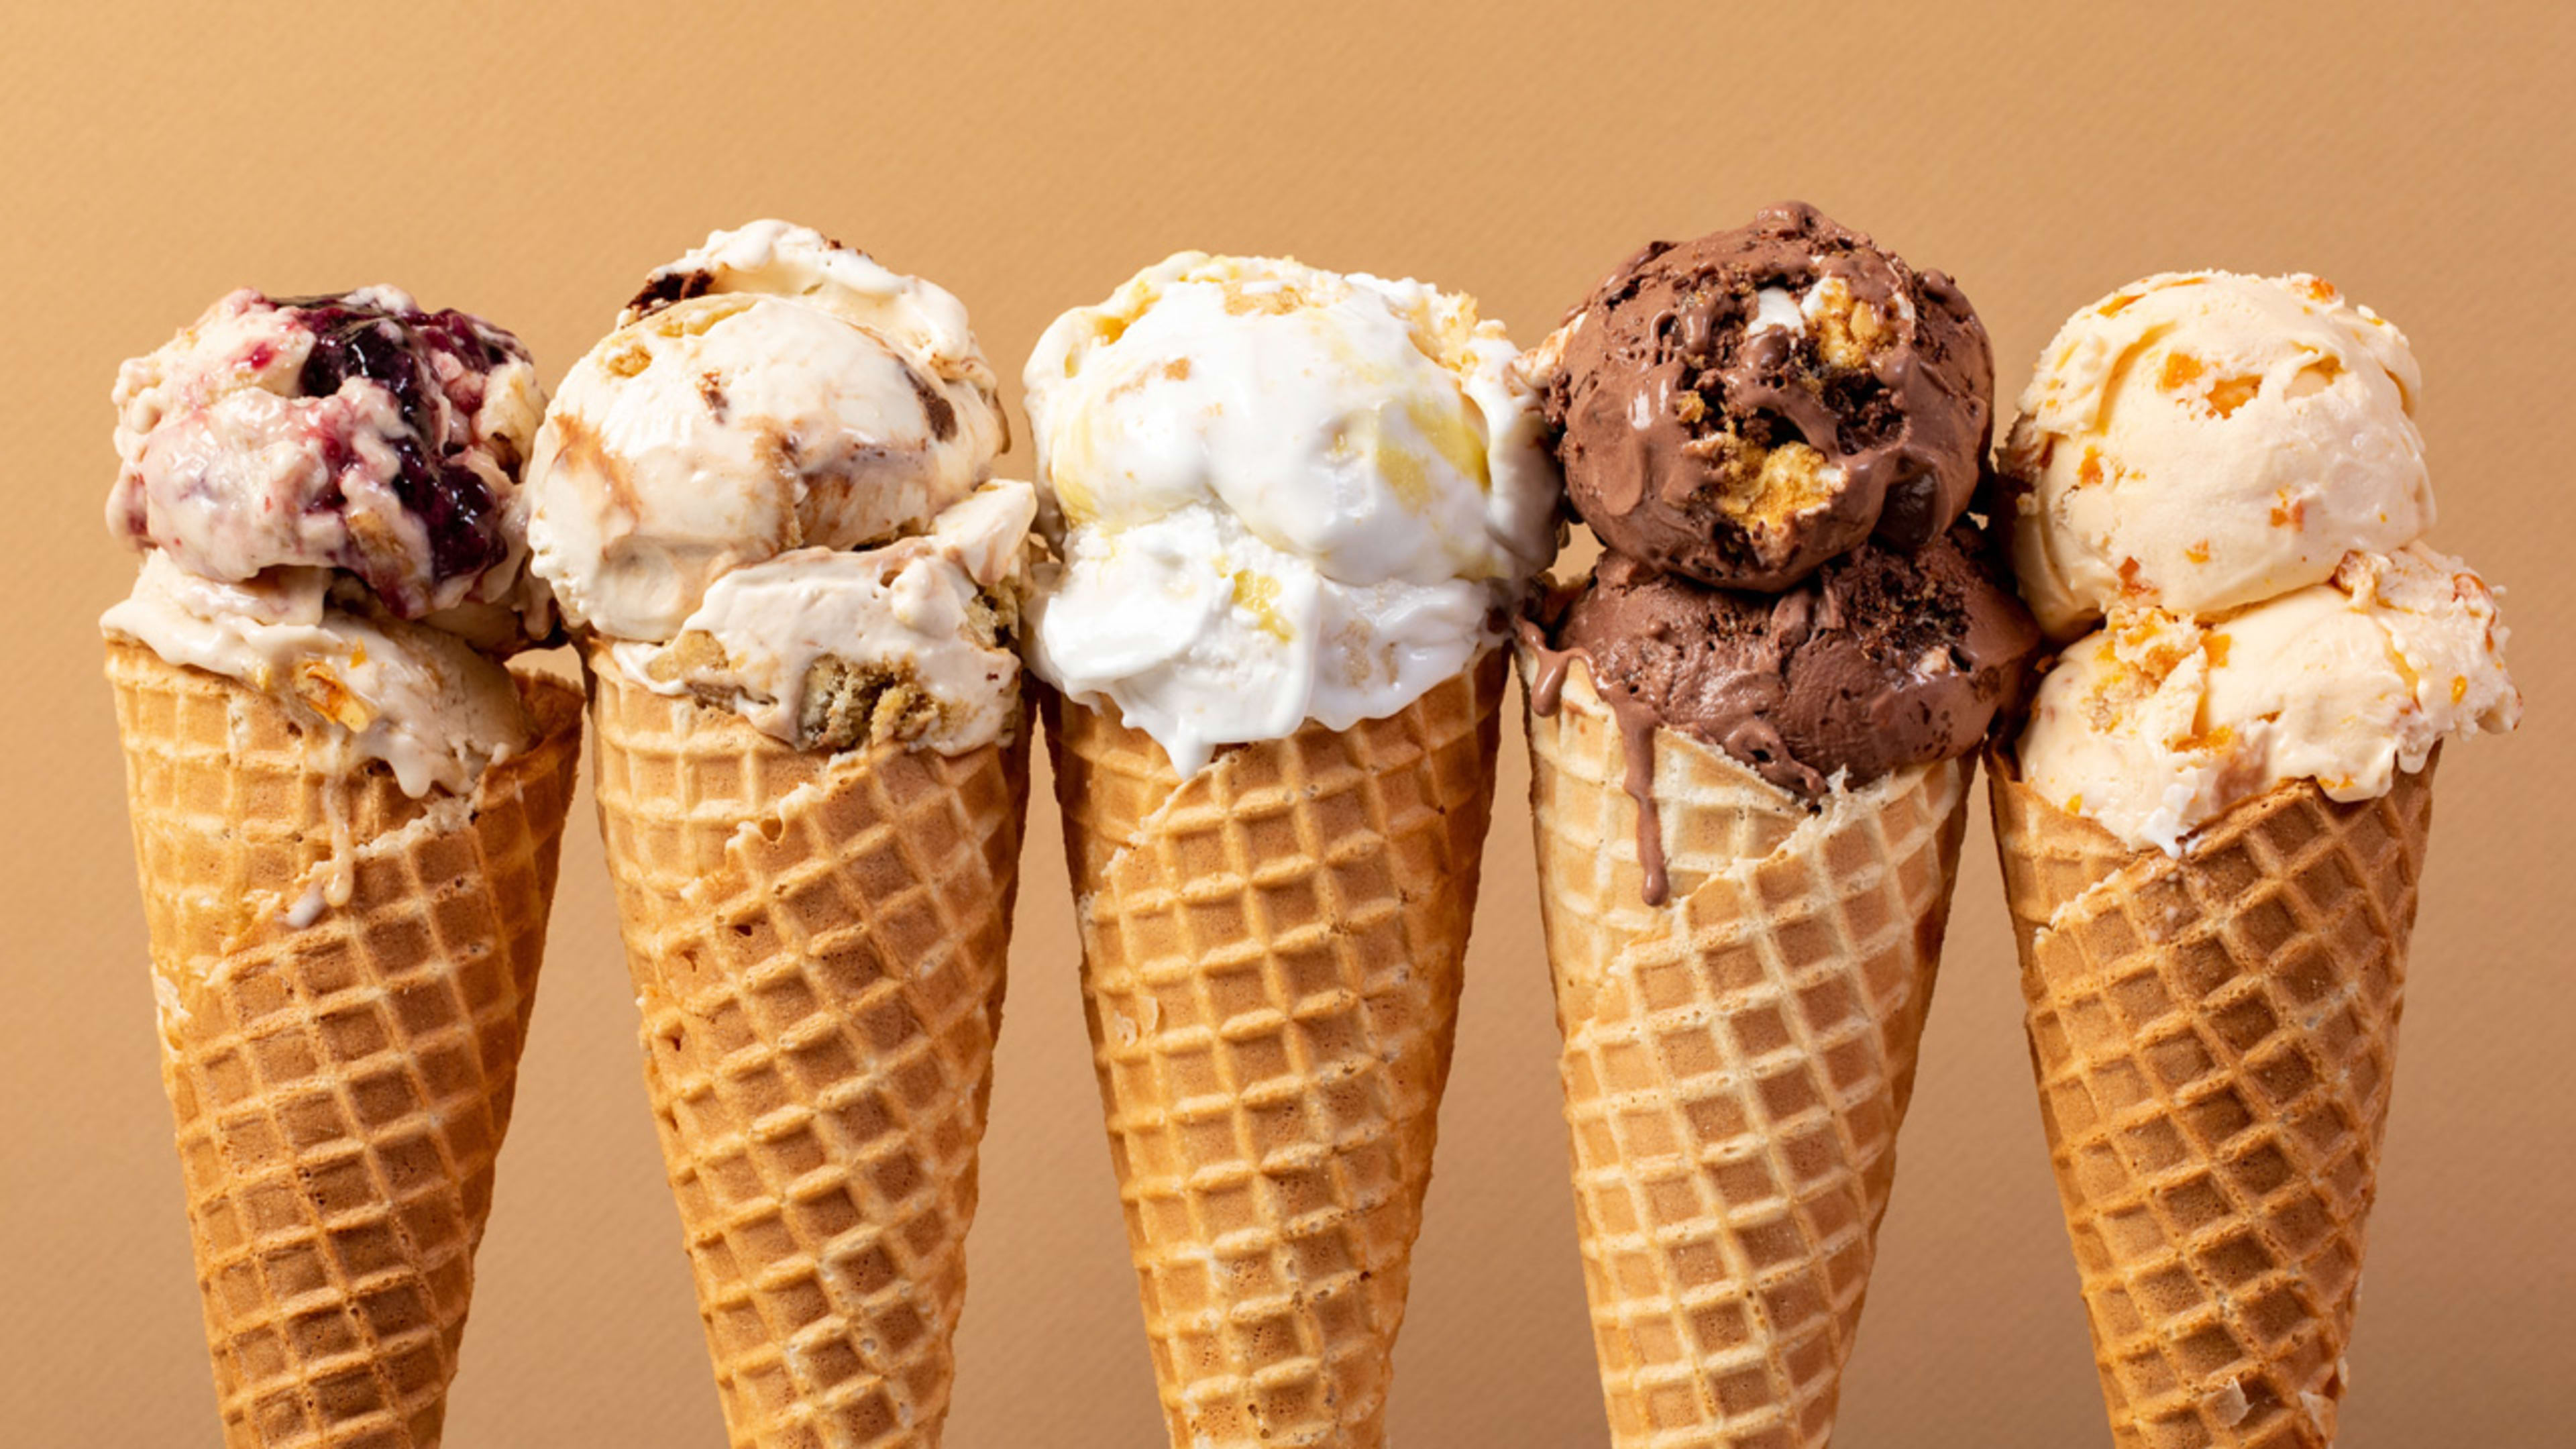 This ice cream company is trying to make vegan ice cream mainstream–and really good